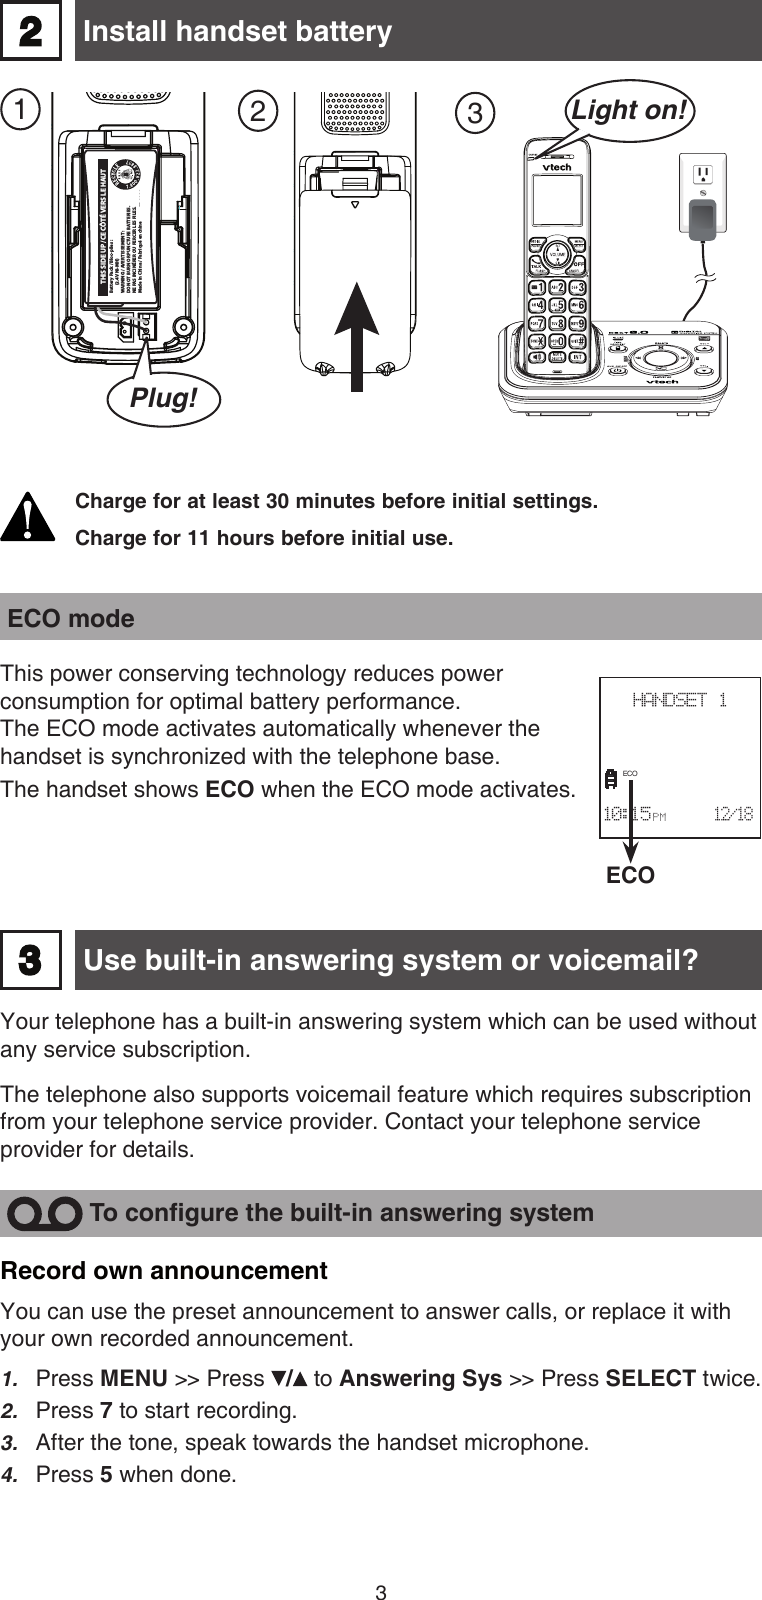 3 Install handset battery2Charge for at least 30 minutes before initial settings.Charge for 11 hours before initial use. 123Light on!ECOHANDSET 1                      10:15 PM      12/18ECO ECO modeThis power conserving technology reduces power  consumption for optimal battery performance.  The ECO mode activates automatically whenever the handset is synchronized with the telephone base. The handset shows ECO when the ECO mode activates. Use built-in answering system or voicemail?Your telephone has a built-in answering system which can be used without any service subscription. The telephone also supports voicemail feature which requires subscription from your telephone service provider. Contact your telephone service provider for details. 3Record own announcementYou can use the preset announcement to answer calls, or replace it with your own recorded announcement.Press MENU &gt;&gt; Press /  to Answering Sys &gt;&gt; Press SELECT twice.Press 7 to start recording.After the tone, speak towards the handset microphone. Press 5 when done.1.2.3.4.  To congure the built-in answering systemBattery Pack / Bloc-piles :  (2.4V Ni-MH)WARNING / AVERTISSEMENT :DO NOT BURN OR PUNCTURE BATTERIES.NE PAS INCINÉRER OU PERCER LES PILES.Made in China / Fabriqué en chine THIS SIDE UP / CE CÔTÉ VERS LE HAUTCR1232Plug!